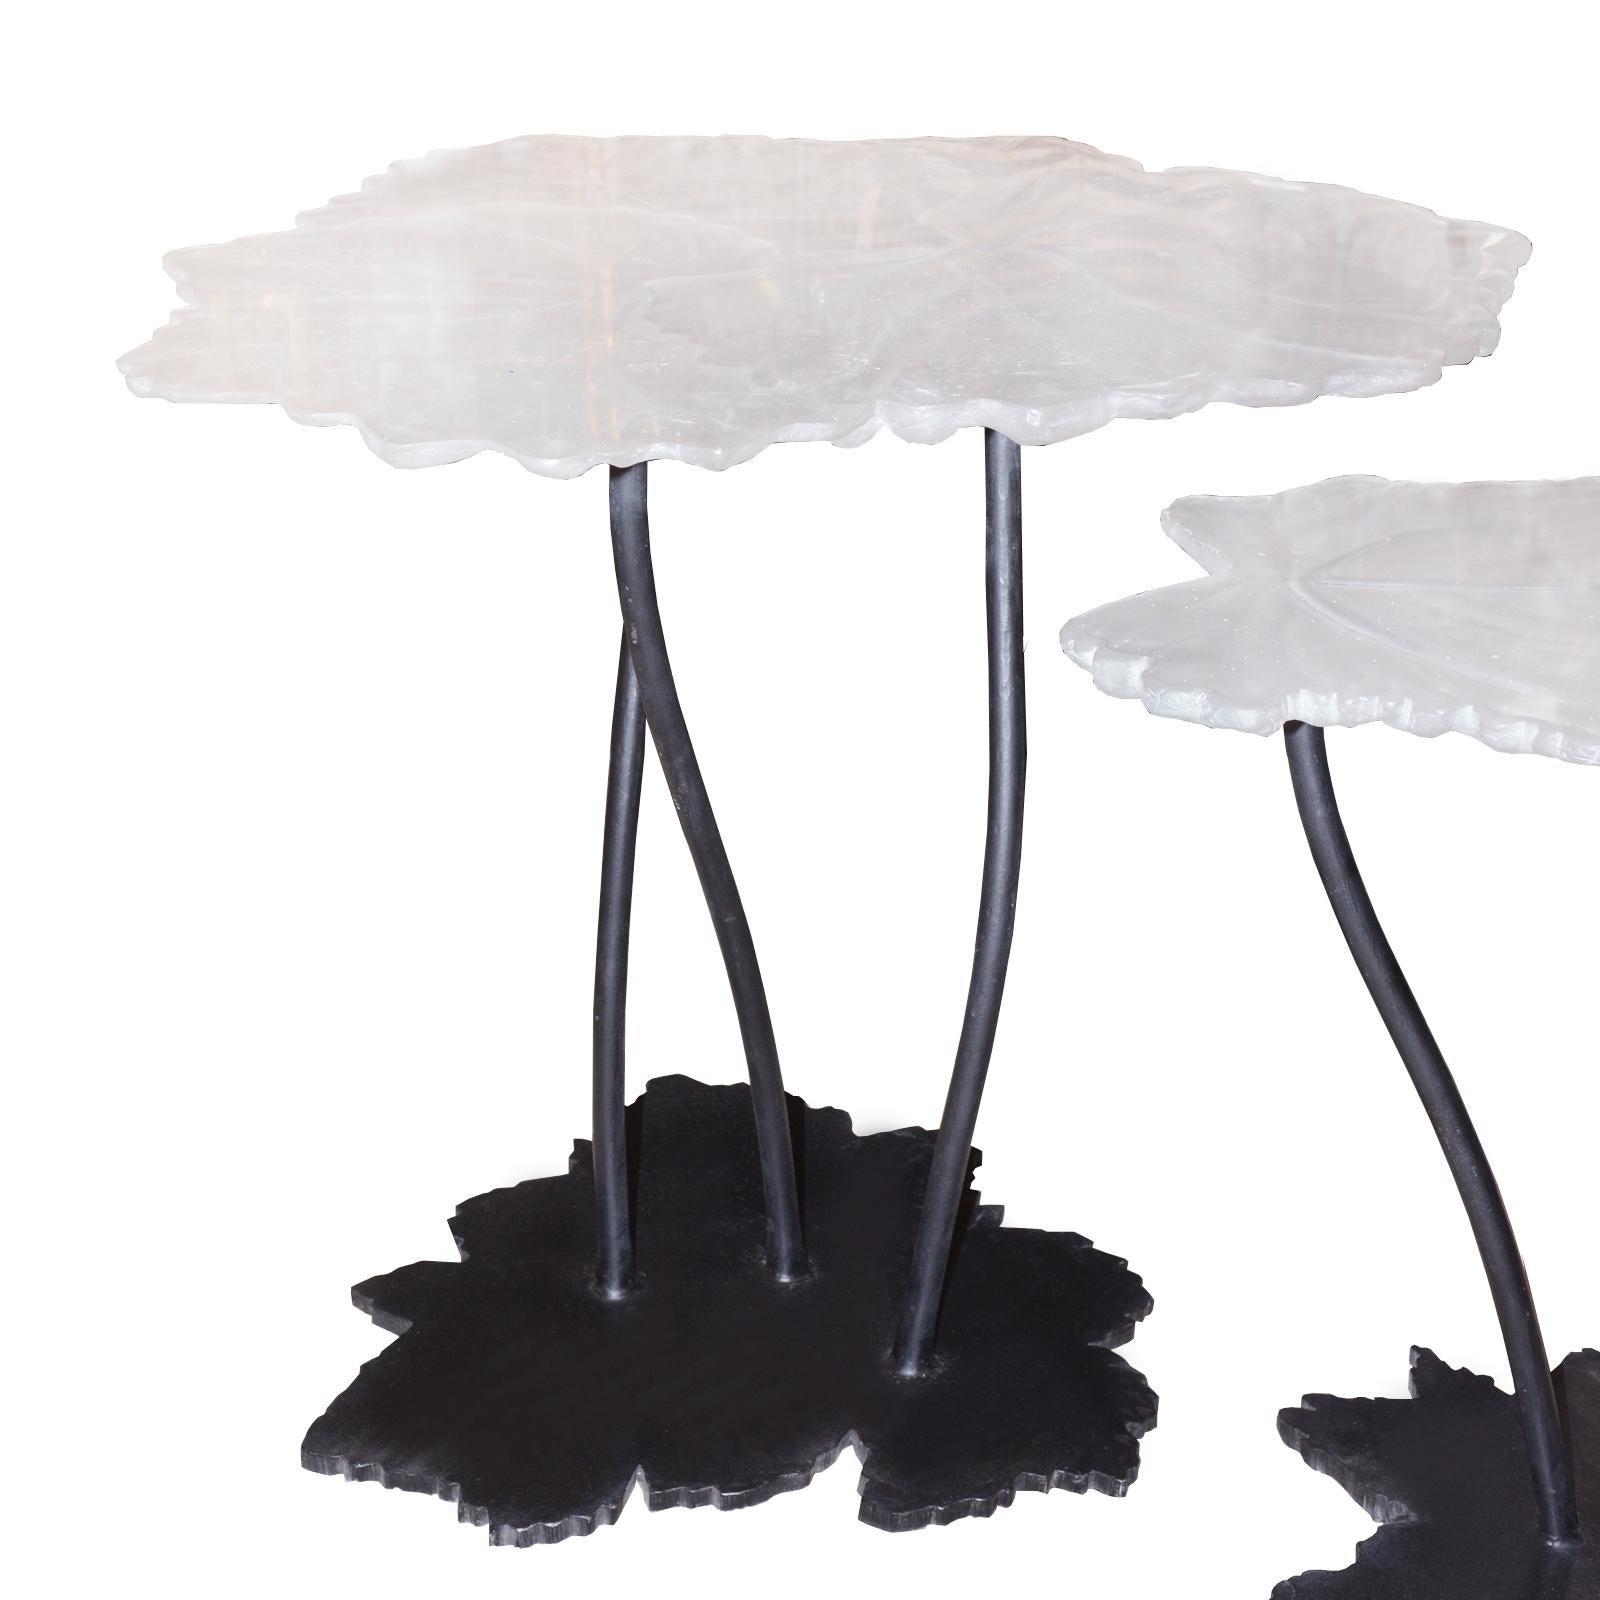 Table vine leaves set of 2 in crystal all
handcrafted, it takes 36 hours to be dry and
strong, all in crystal glass paste, hand
carved. On darkened forged iron base.
Exceptional and unique piece, made in France
in 2019.
Measures: Table vine